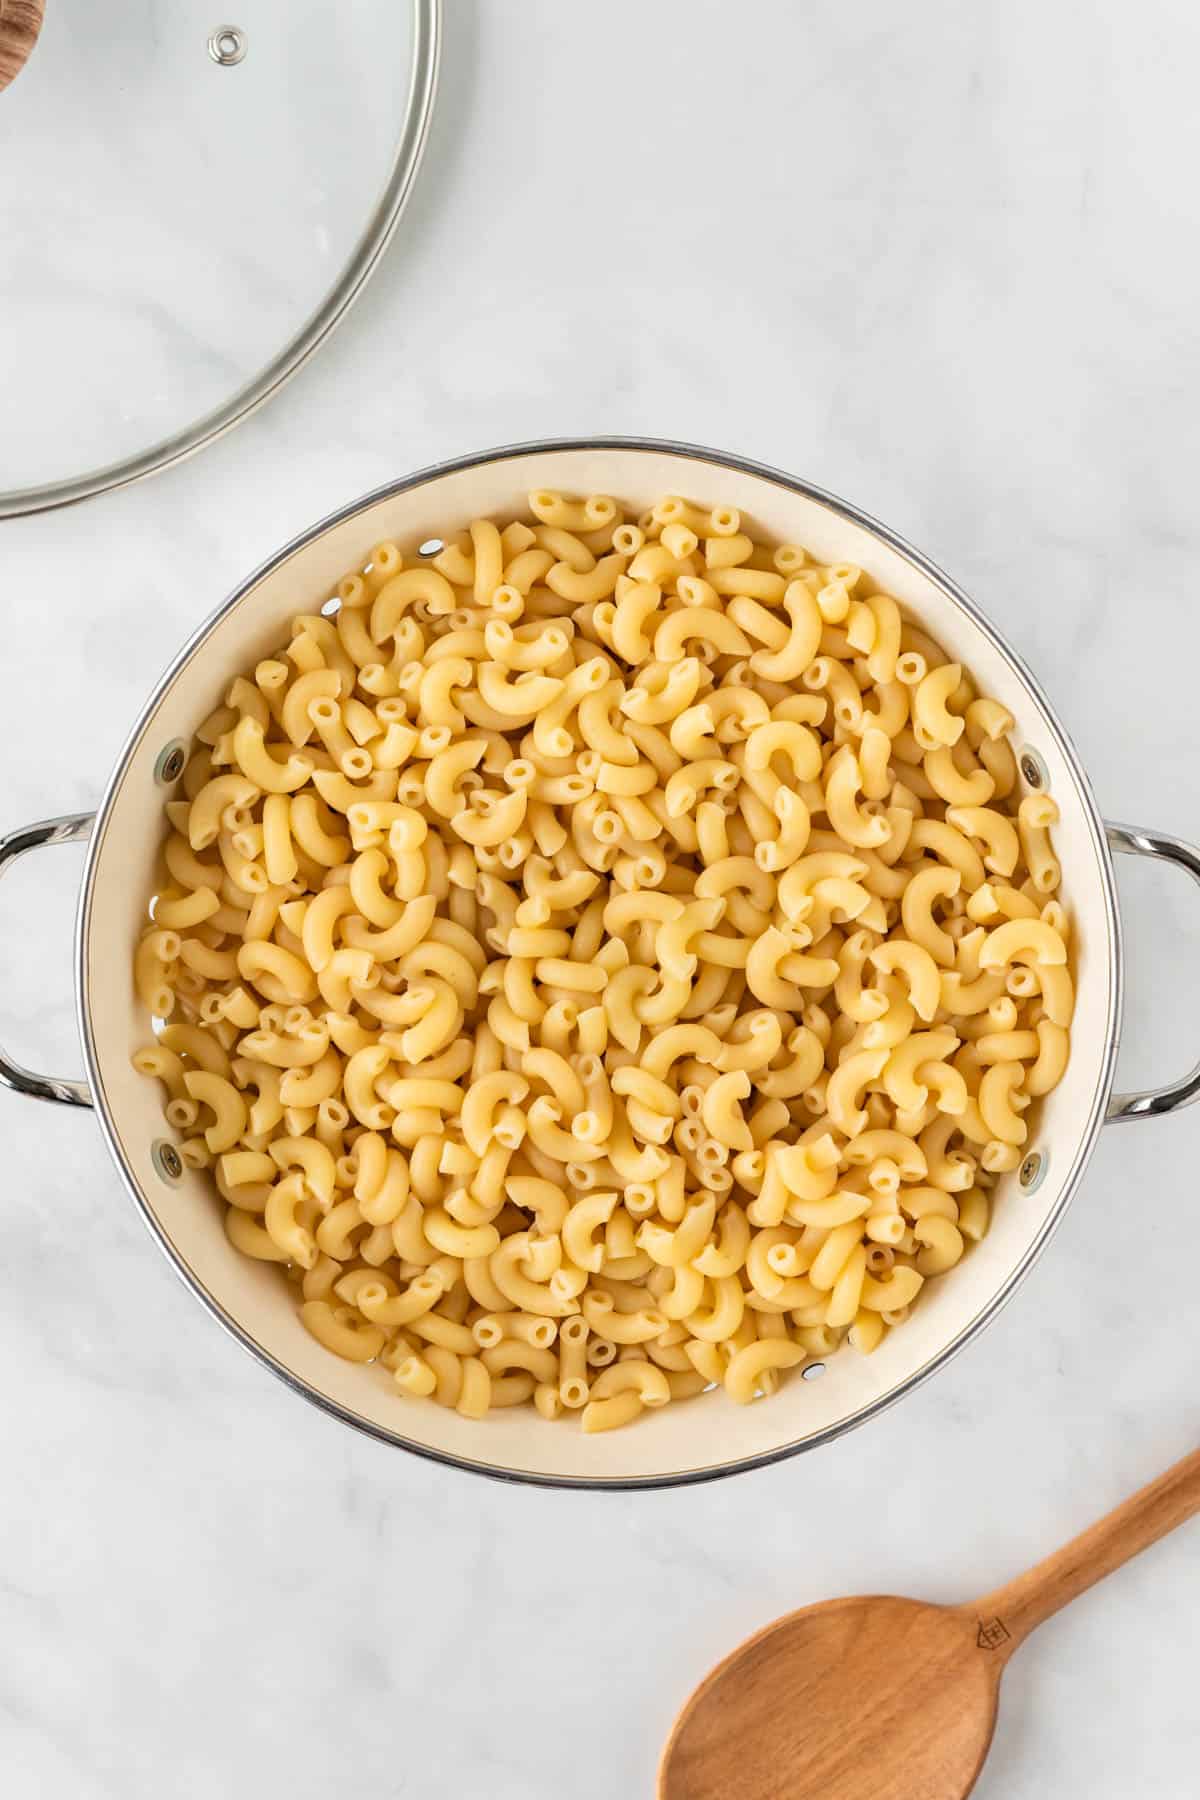 cooked macaroni noodles in a strainer